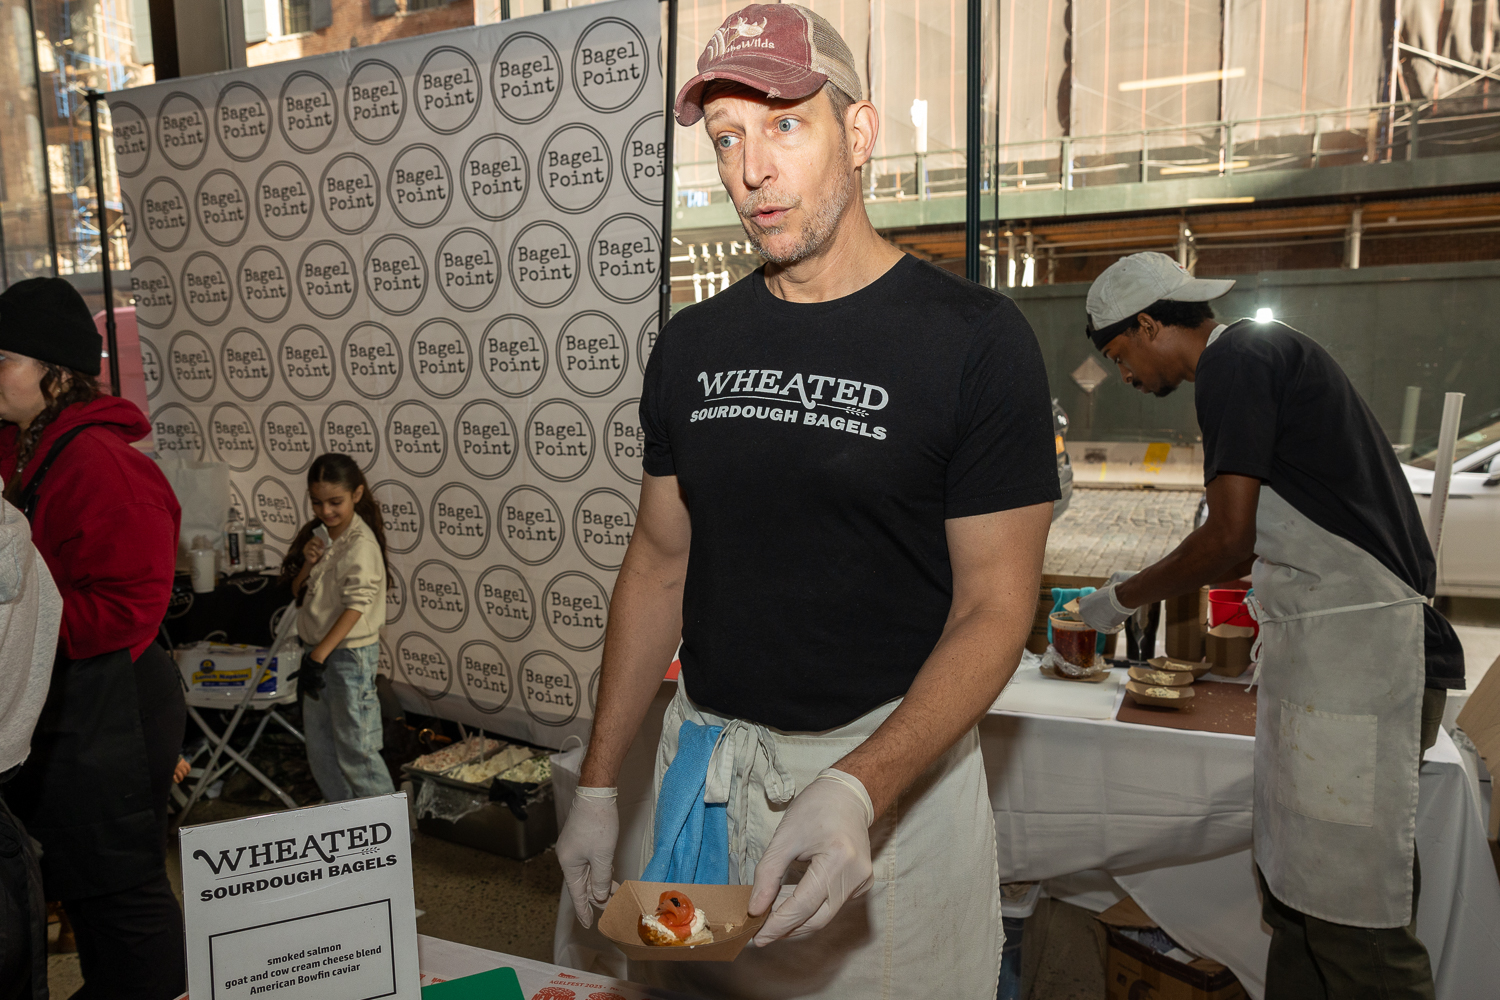 A man in a red baseball hat wearing a black shirt and white apron with white gloves handing out samples.